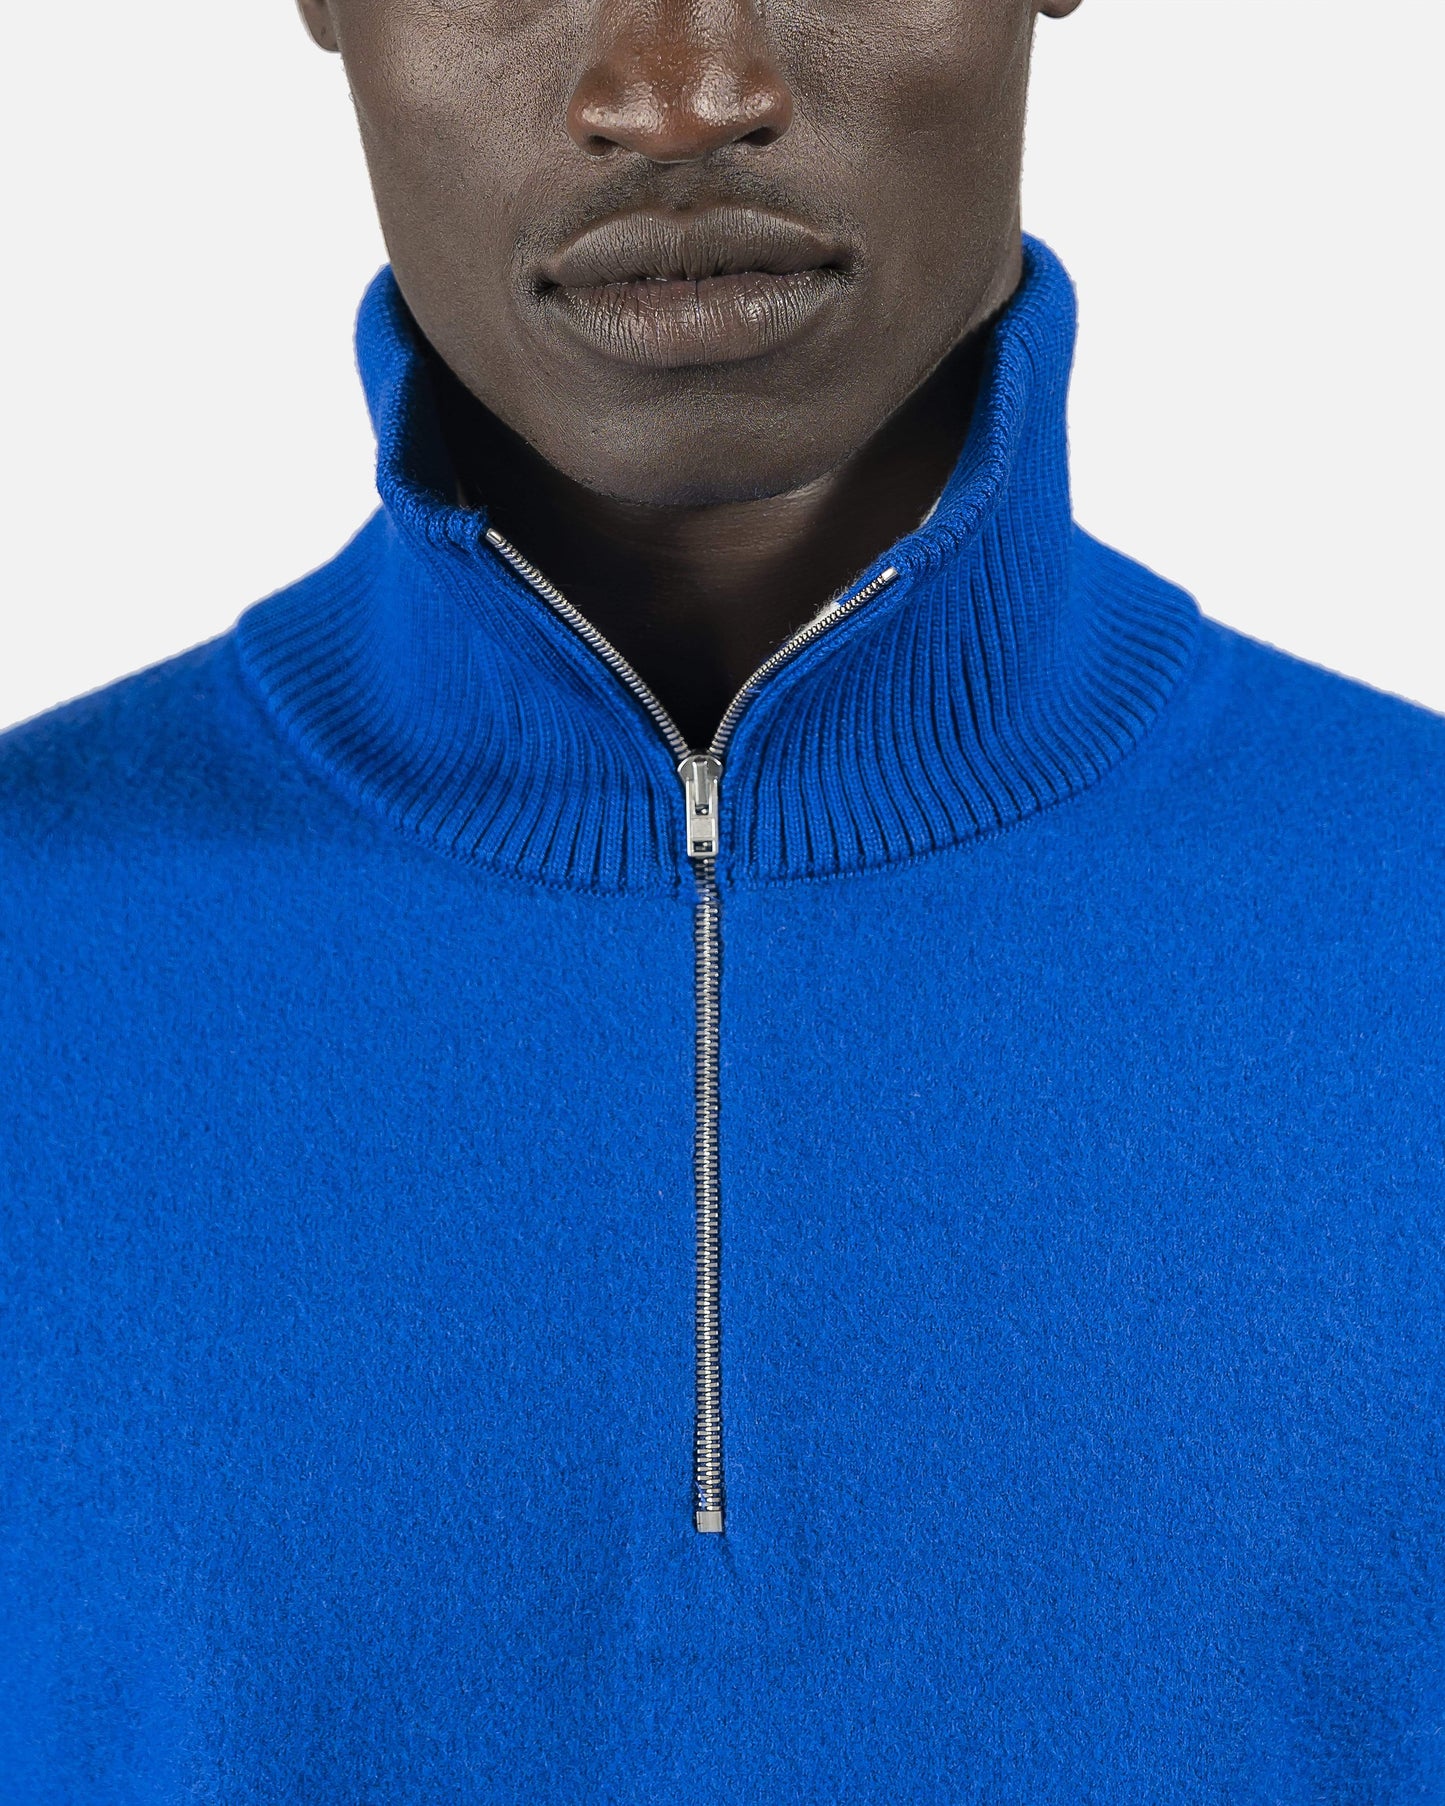 Maison Margiela mens sweater Relaxed Fit 1/4 Zip in Blue/White